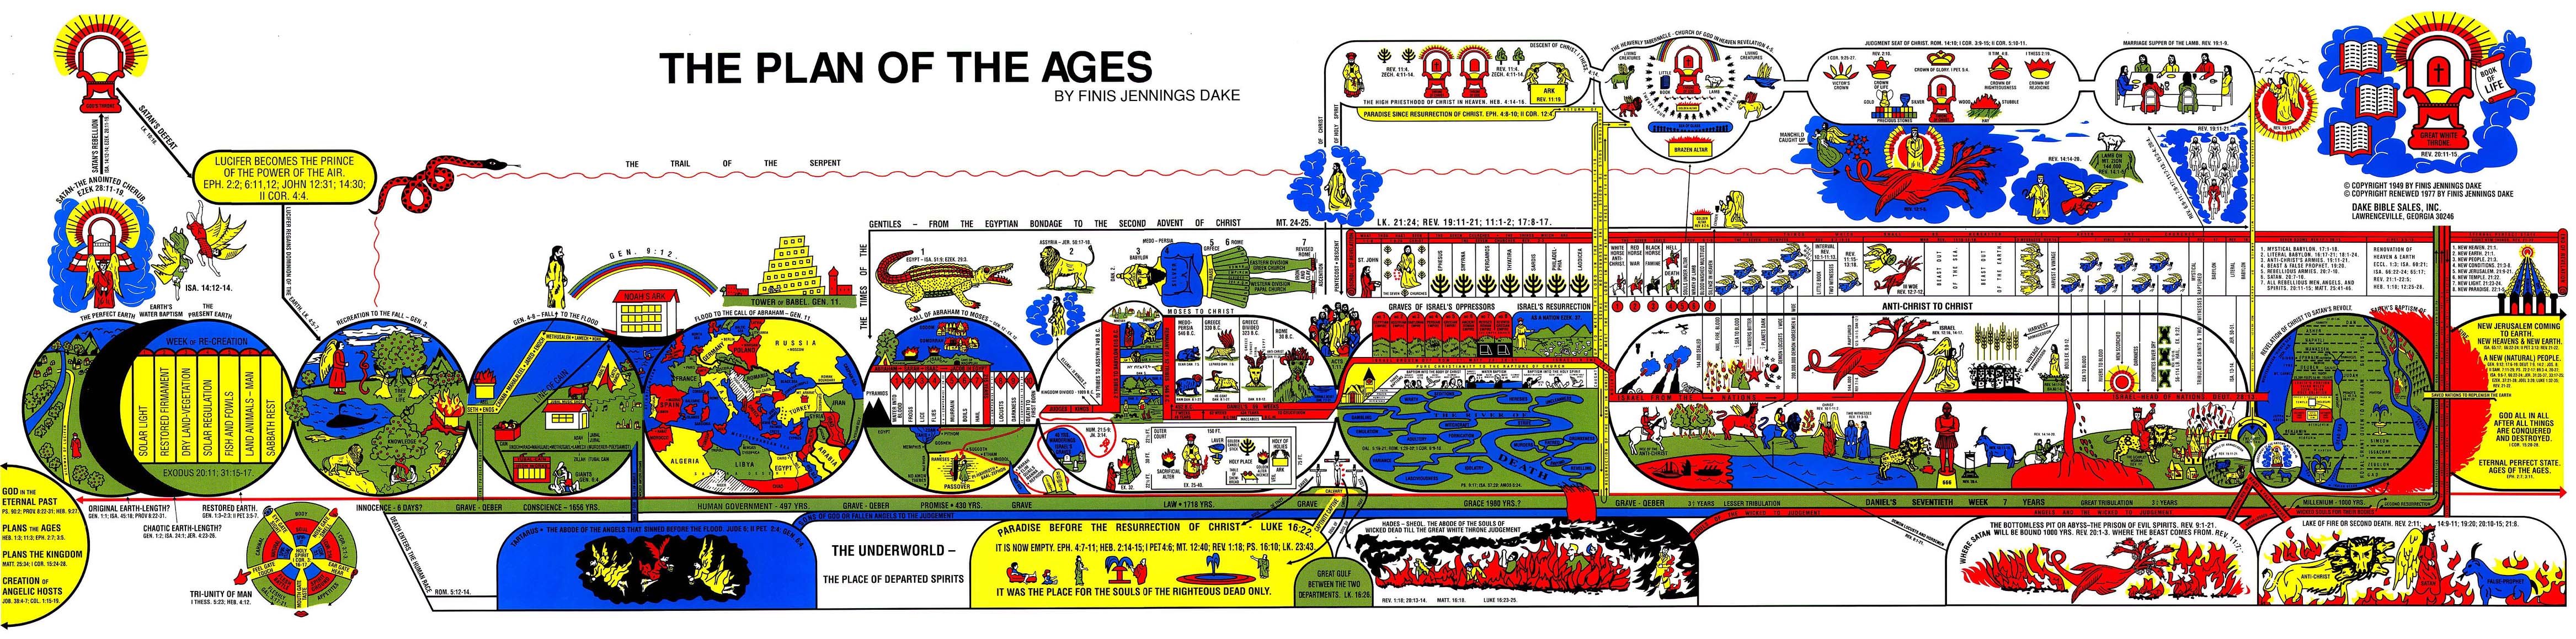 The Plan of the Ages Bible chart